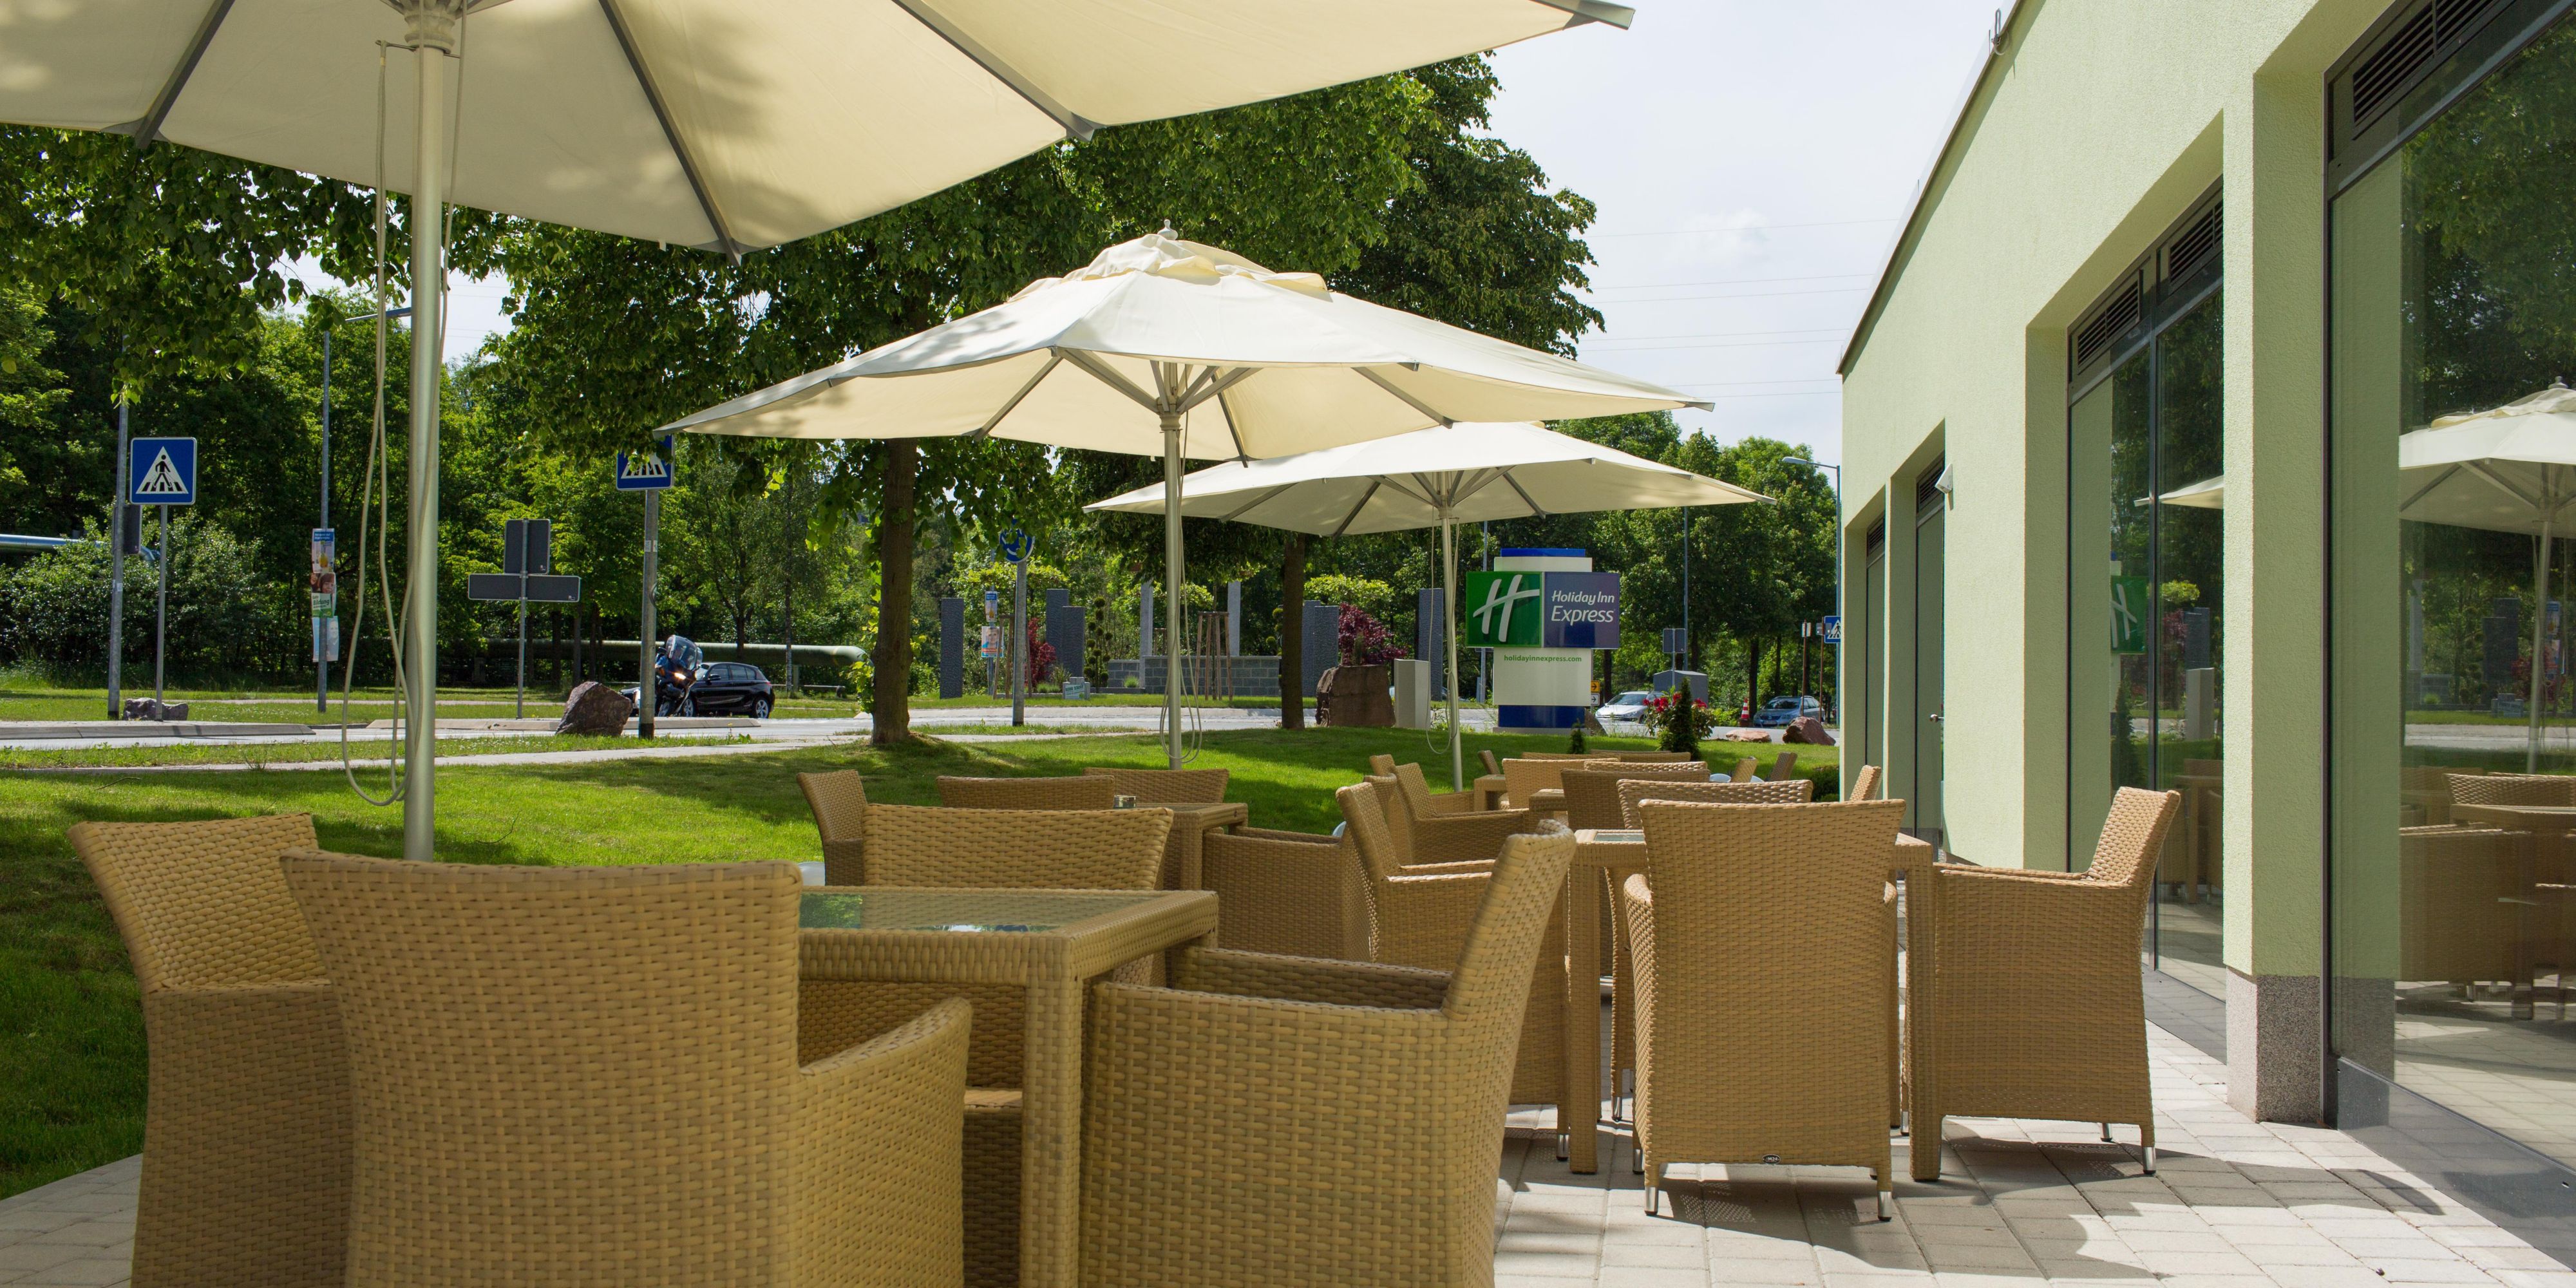 Next to our outdoor terrace, you can relax in the sun and have a cold drink.